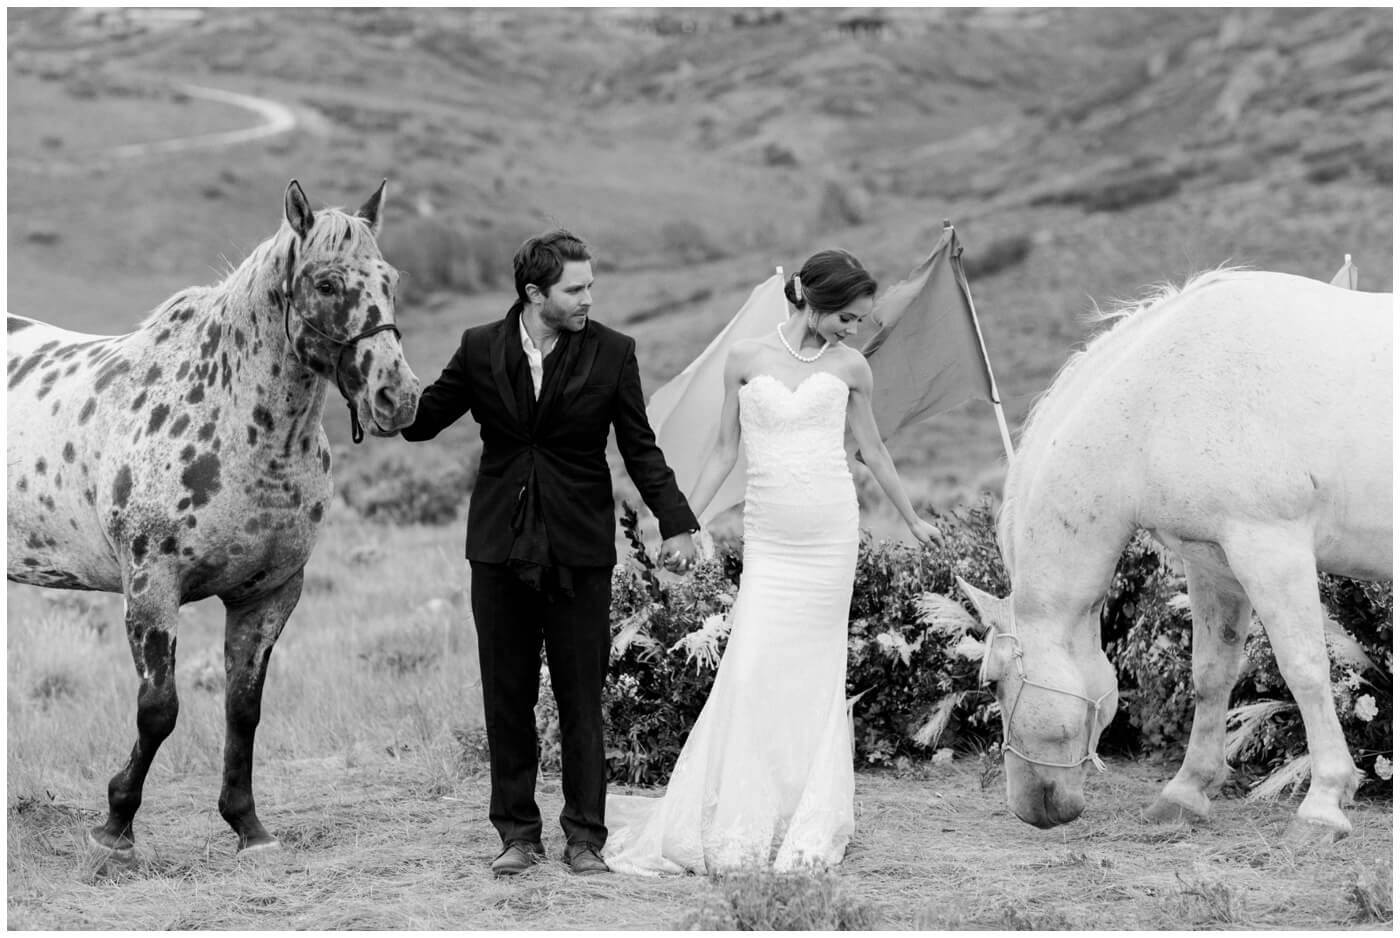 Wedding in the mountains | A couple stand next to their horses on their wedding day